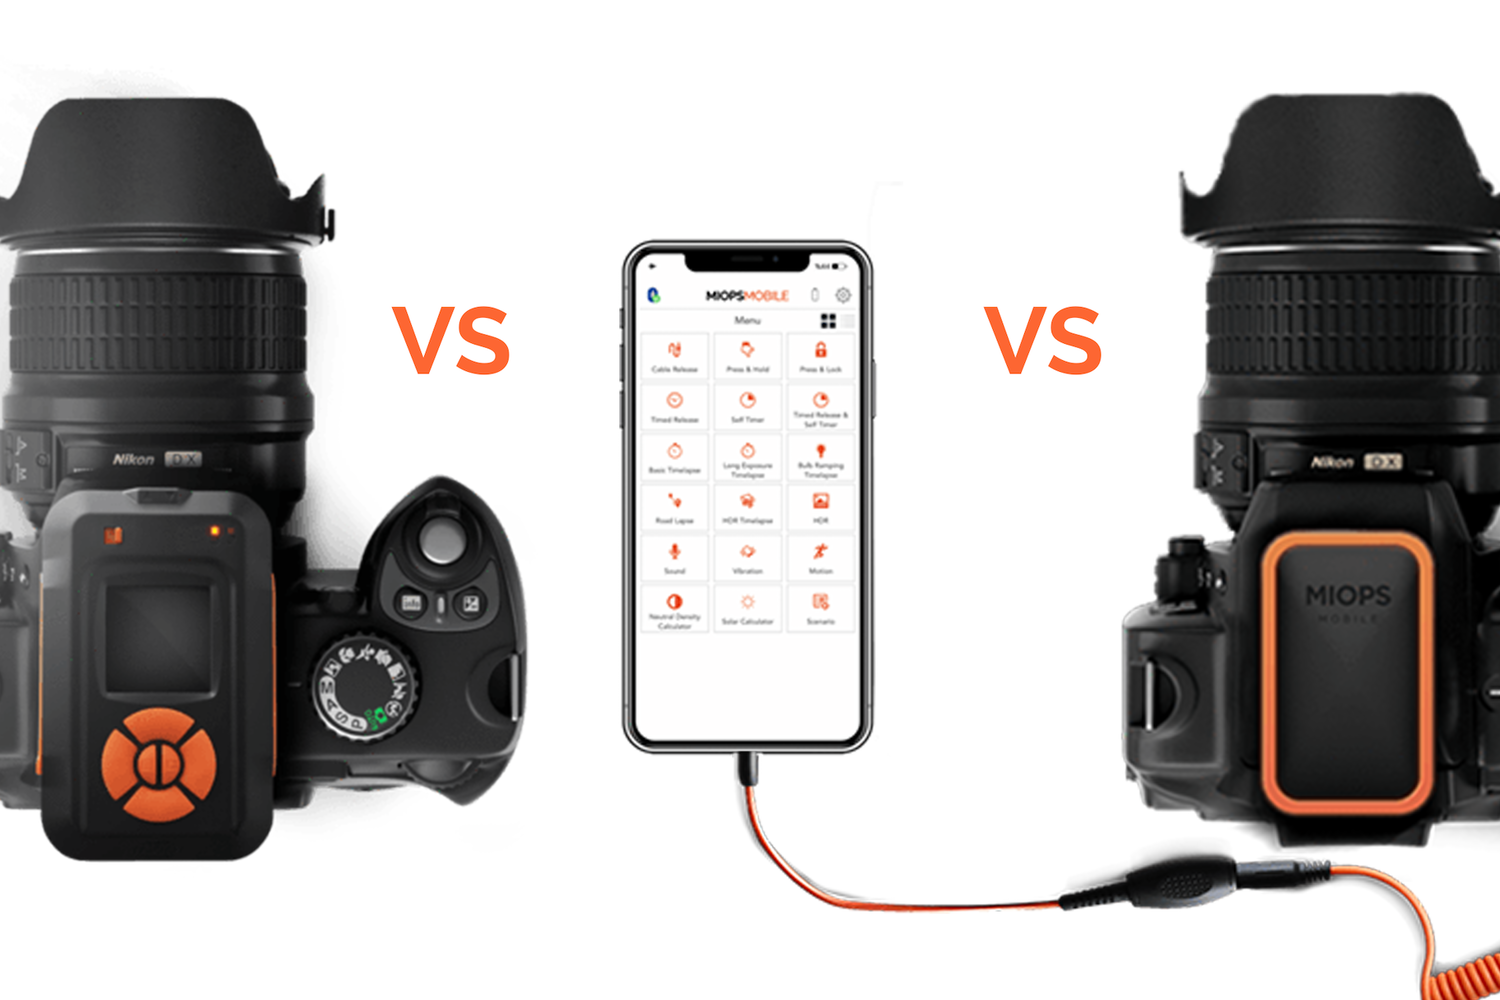 Differences between MIOPS Smart+, RemotePlus and Mobile Dongle